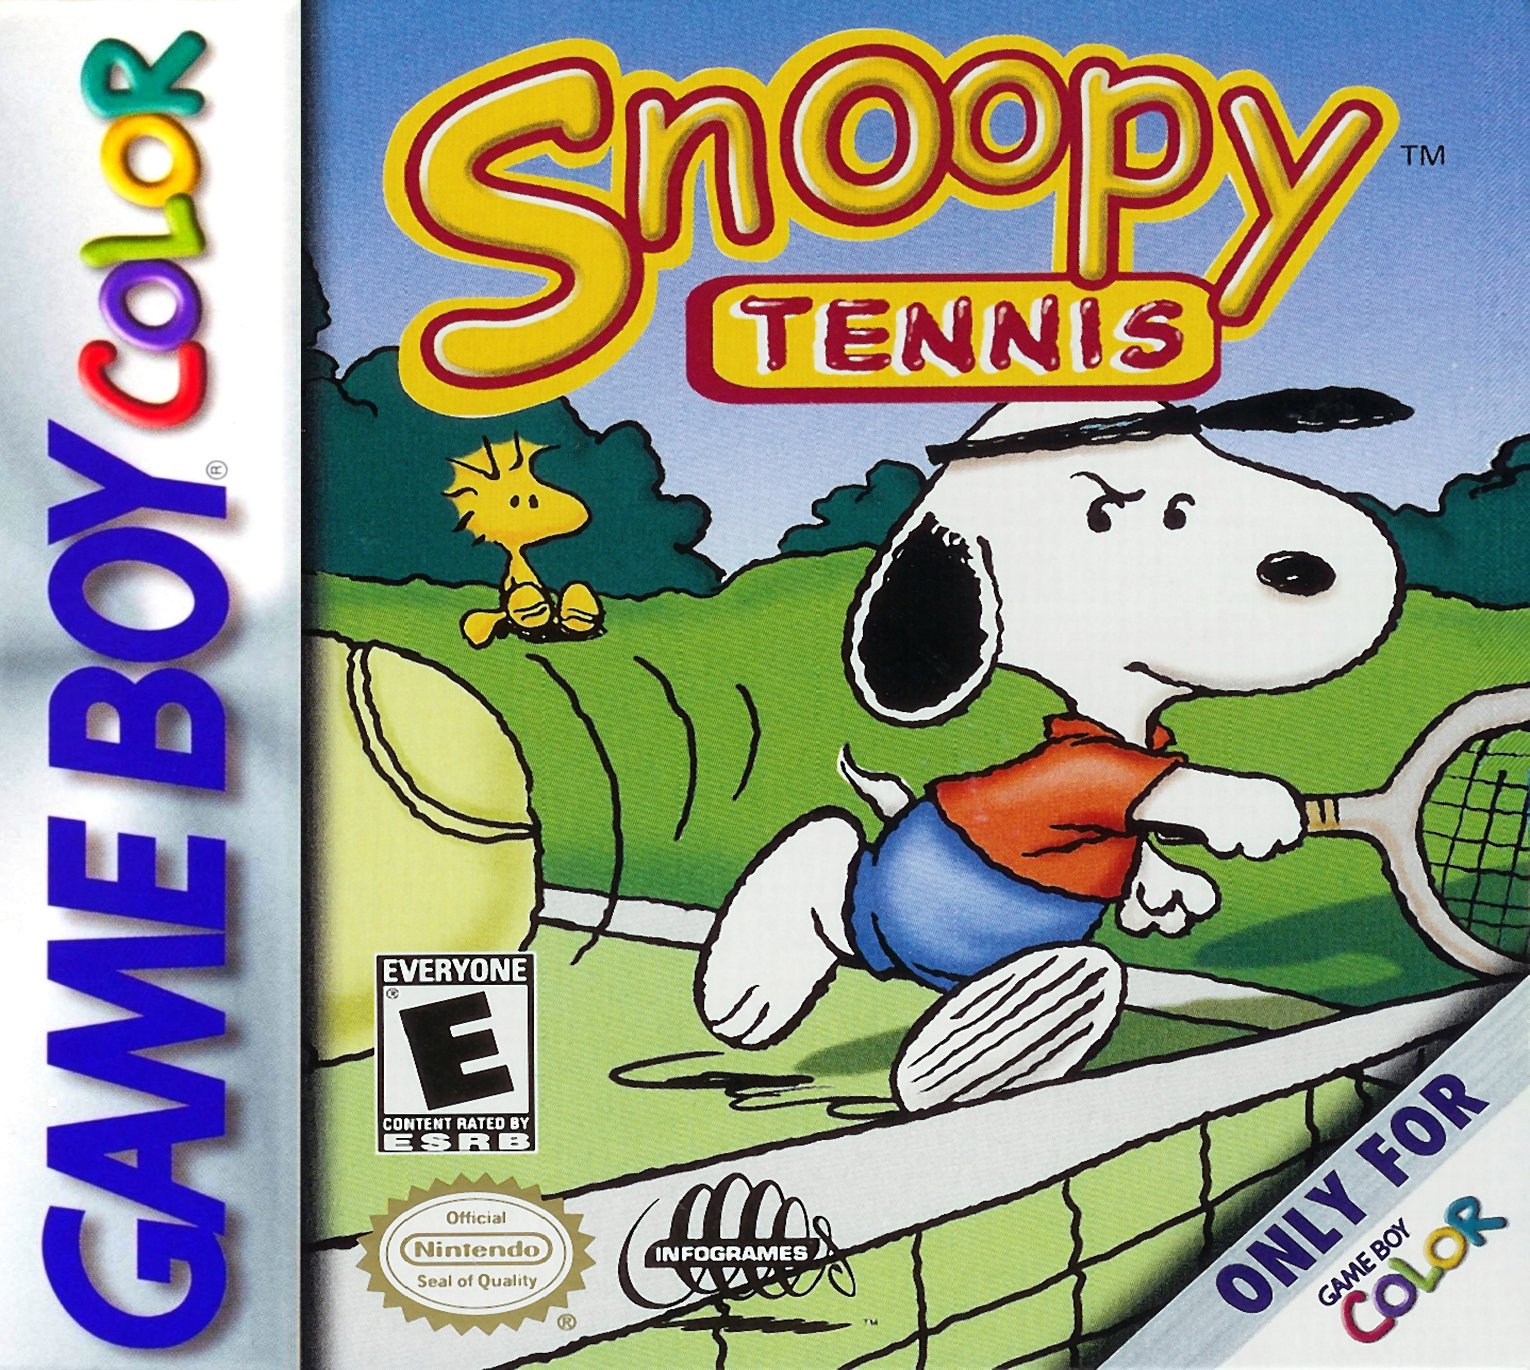 Image of Snoopy Tennis